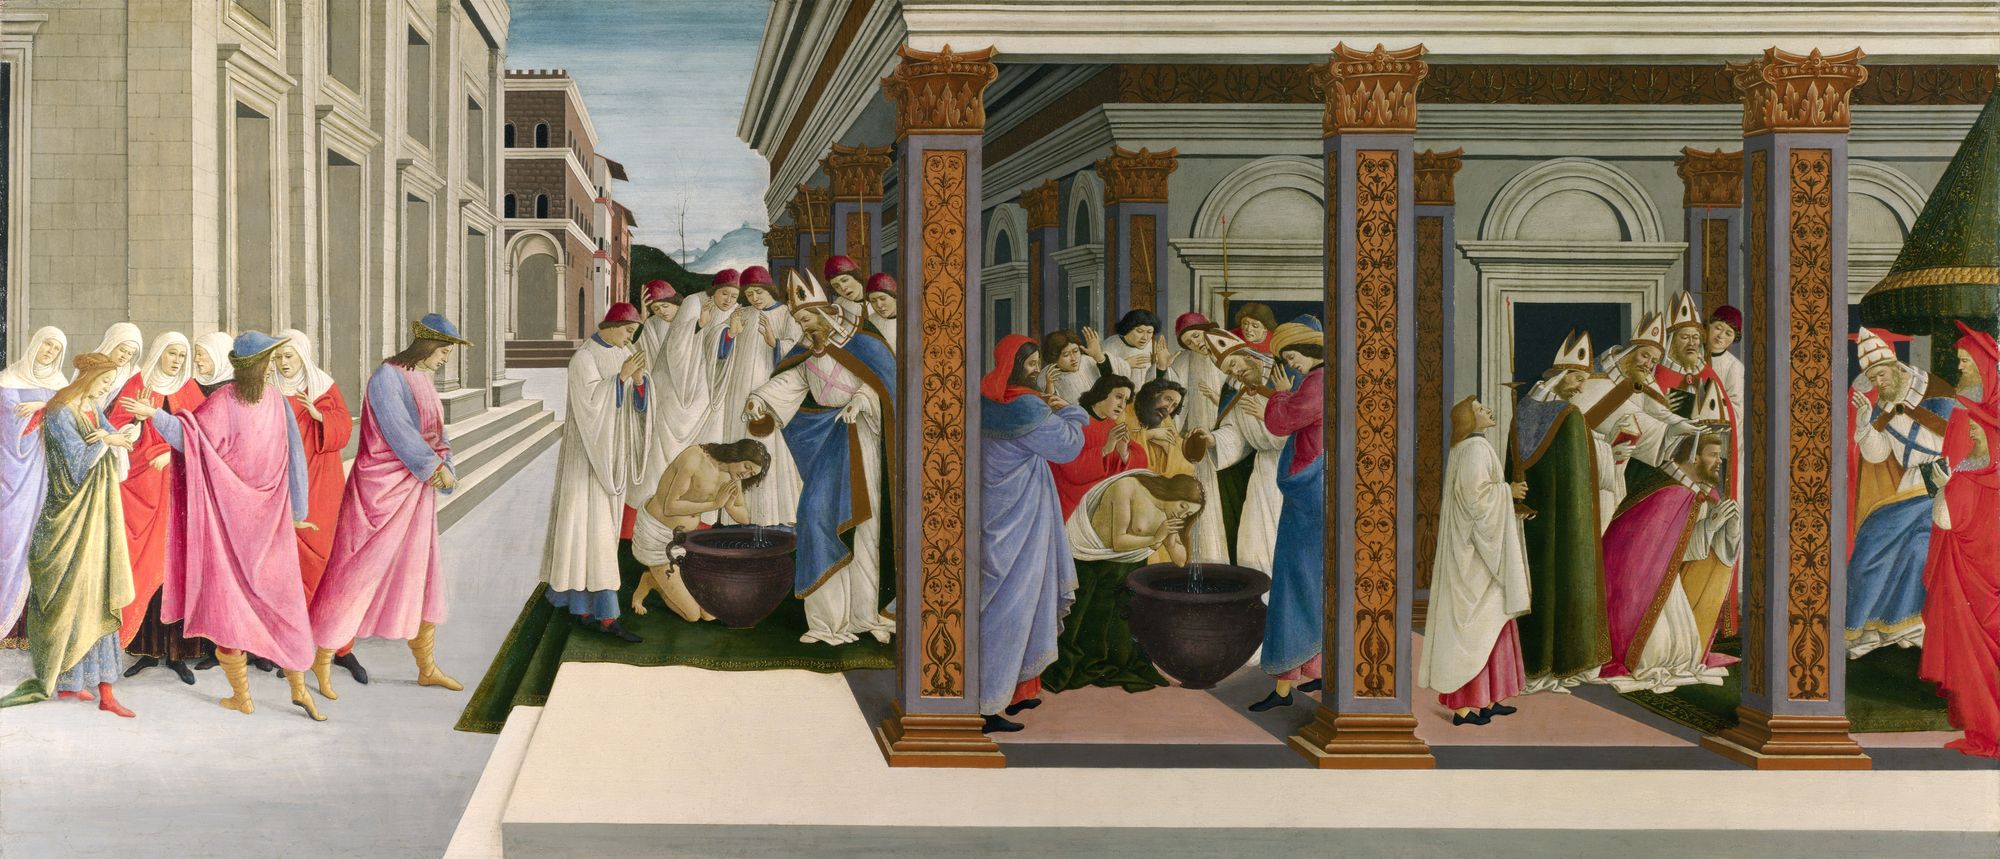 Botticelli's Baptism of Cenobius and his appointment as Bishop